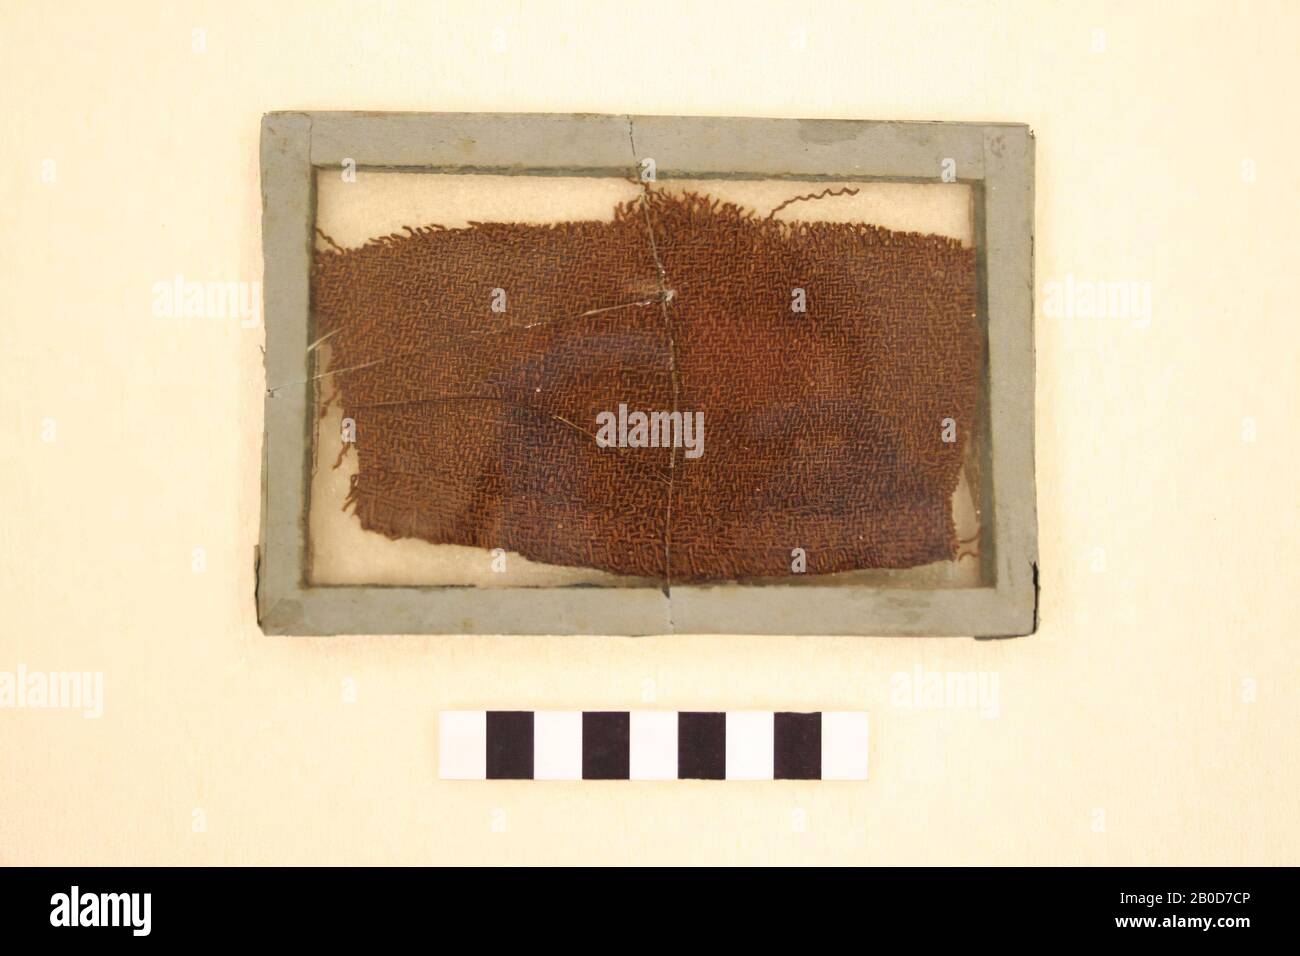 Lap textile in a broken glass frame. On the glass incorrectly marked EG 2, textile, organic, wool, Germany Stock Photo